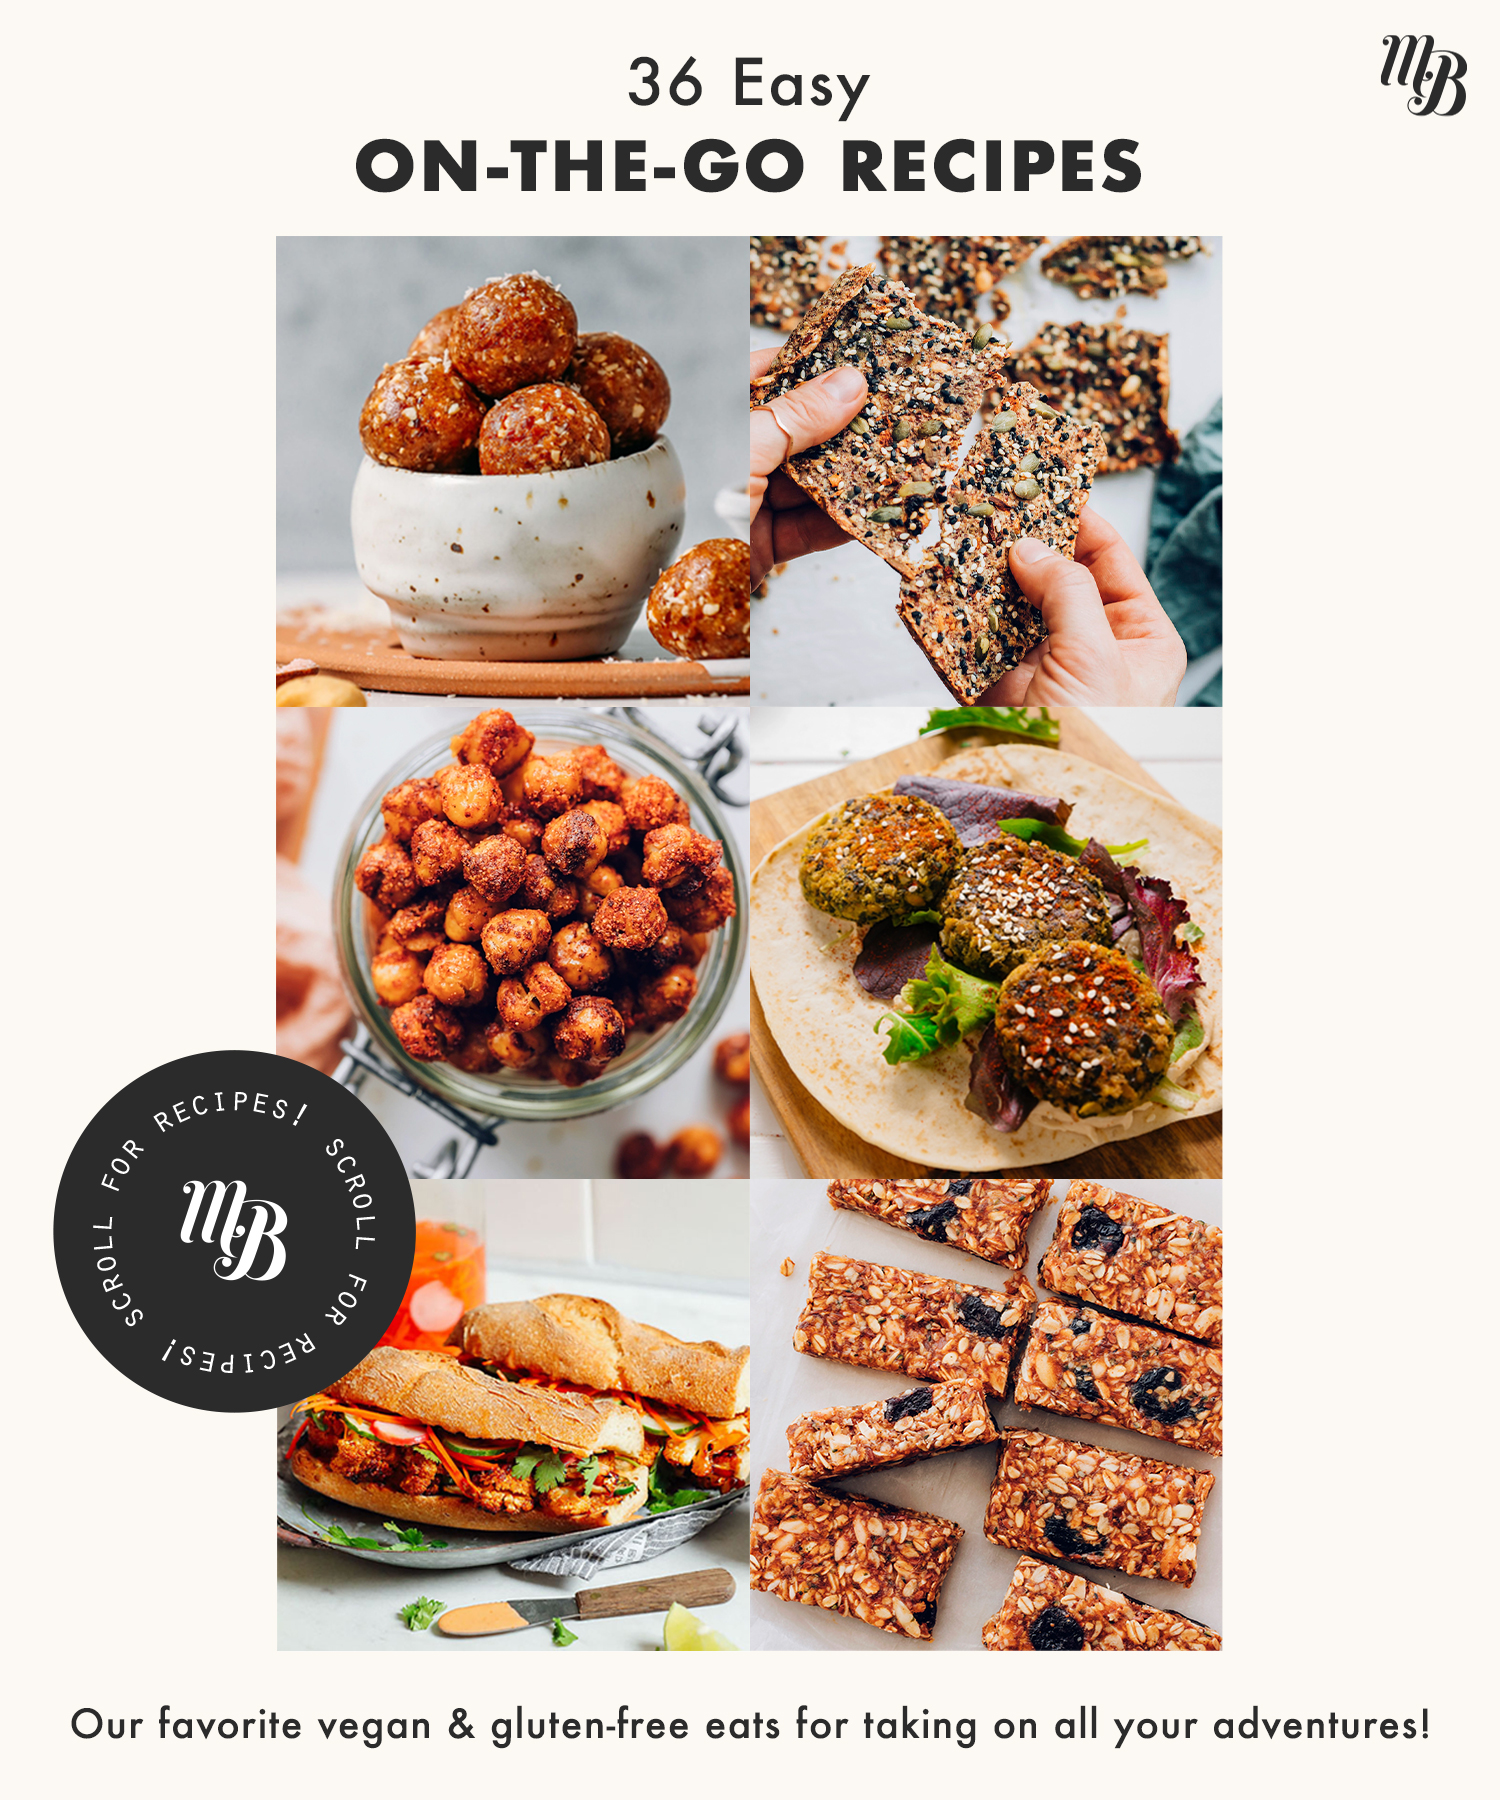 Assortment of vegan and gluten-free recipes for taking on the go